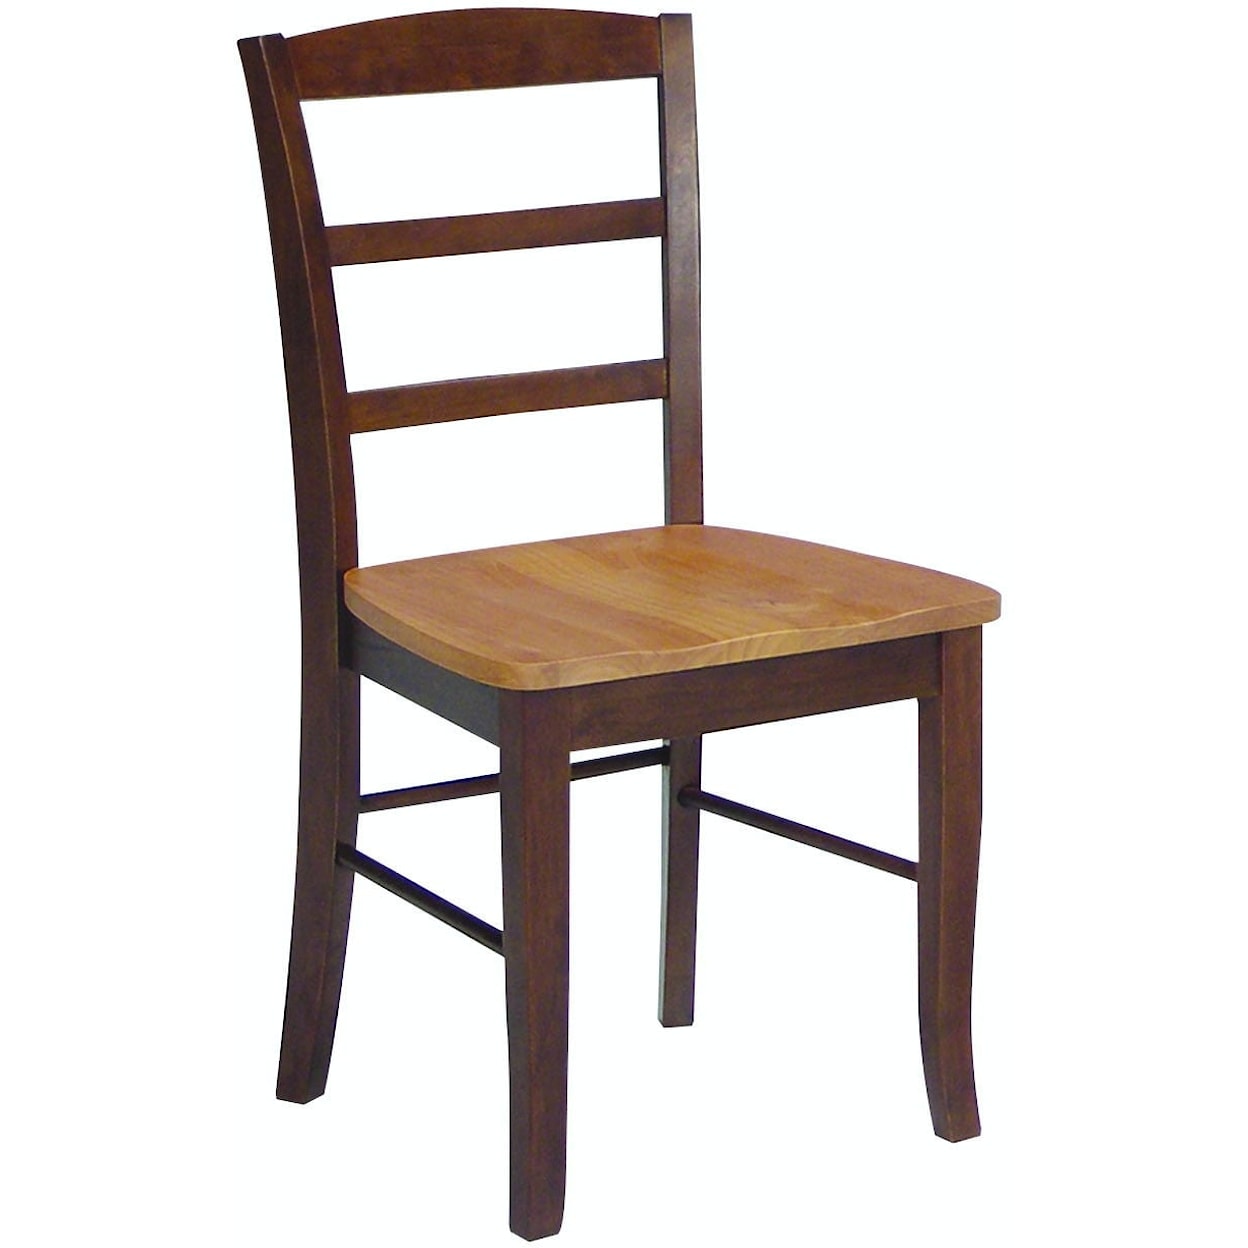 John Thomas Dining Essentials Madrid Dining Chair in Cinnamon / Expresso